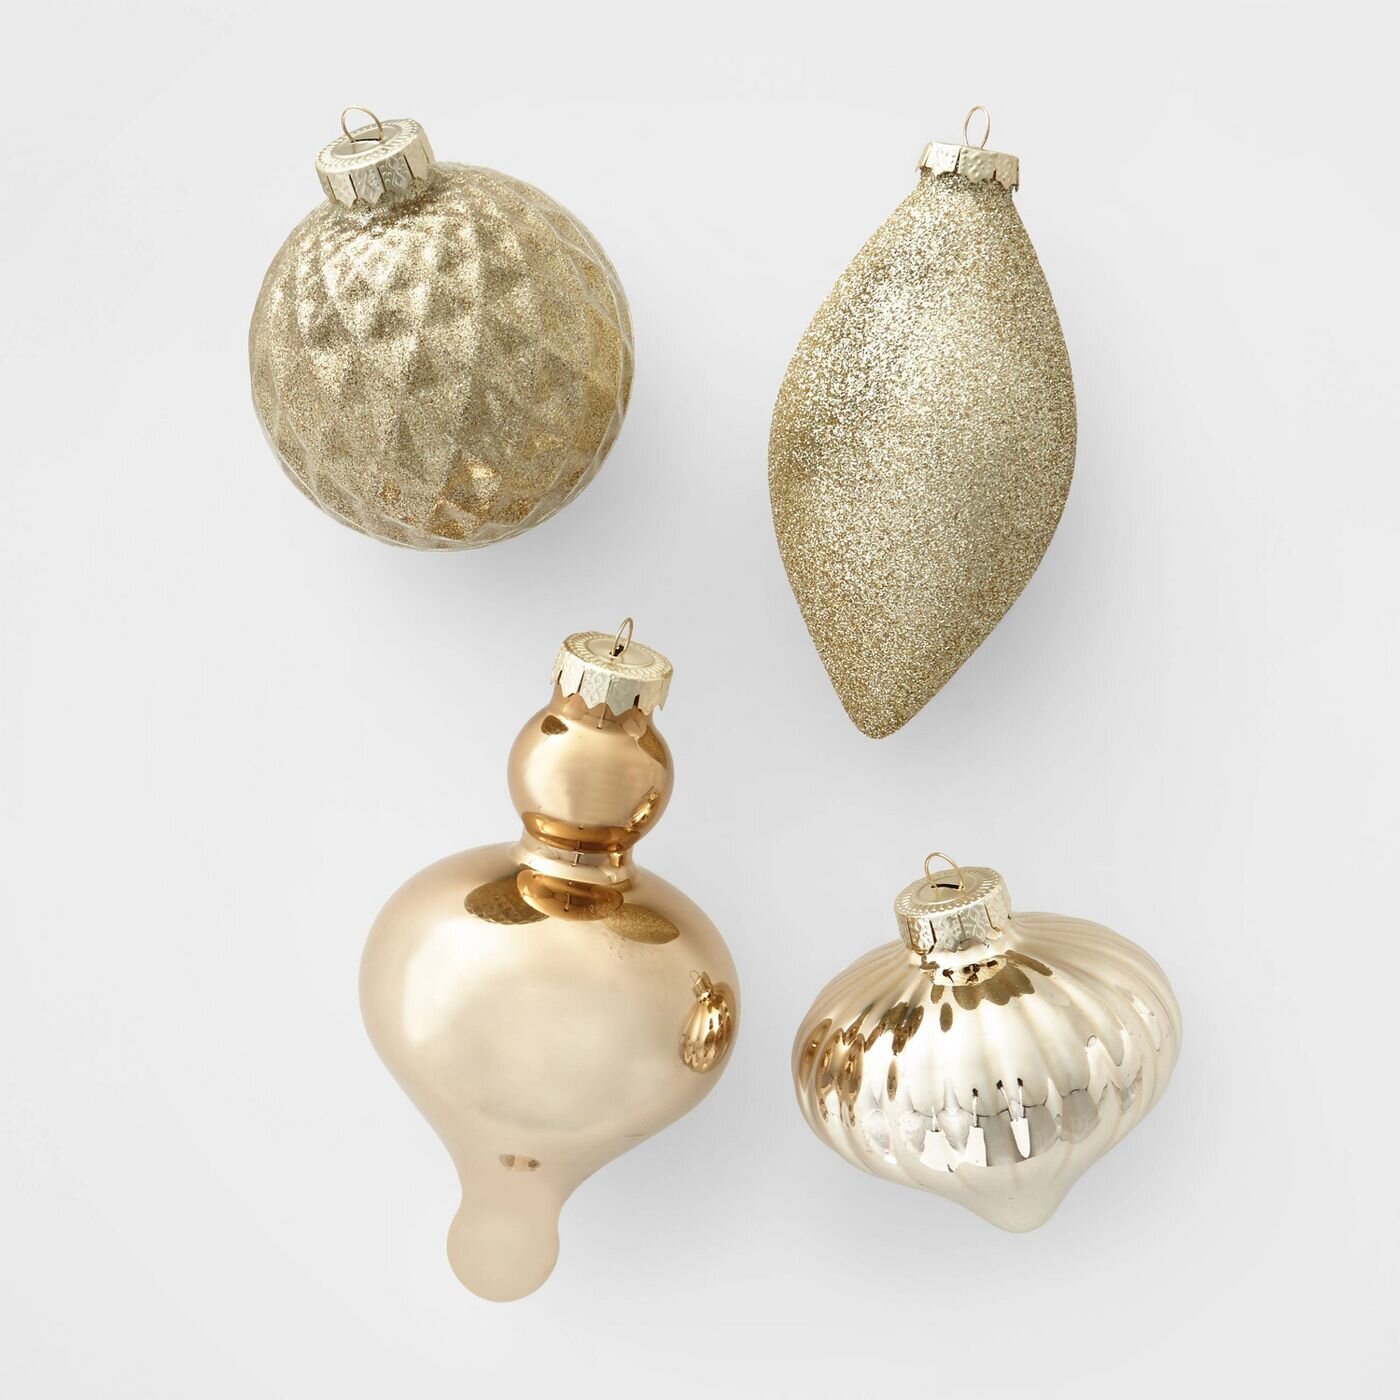 10ct Glass Assorted Christmas Ornament Set Champagne & Gold.jpg